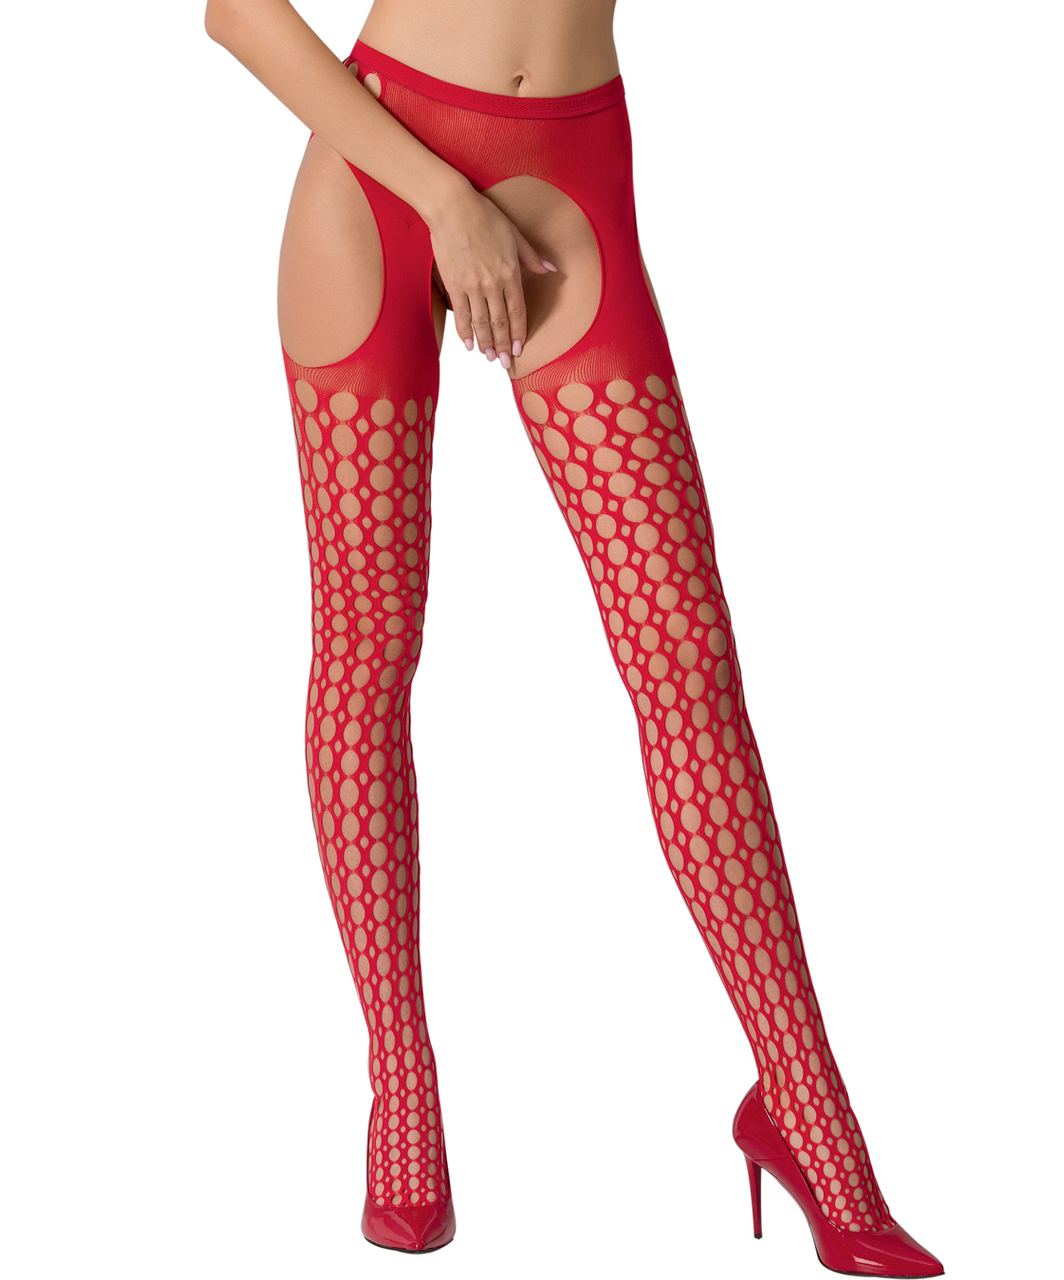 Passion S006 net crotchless tights